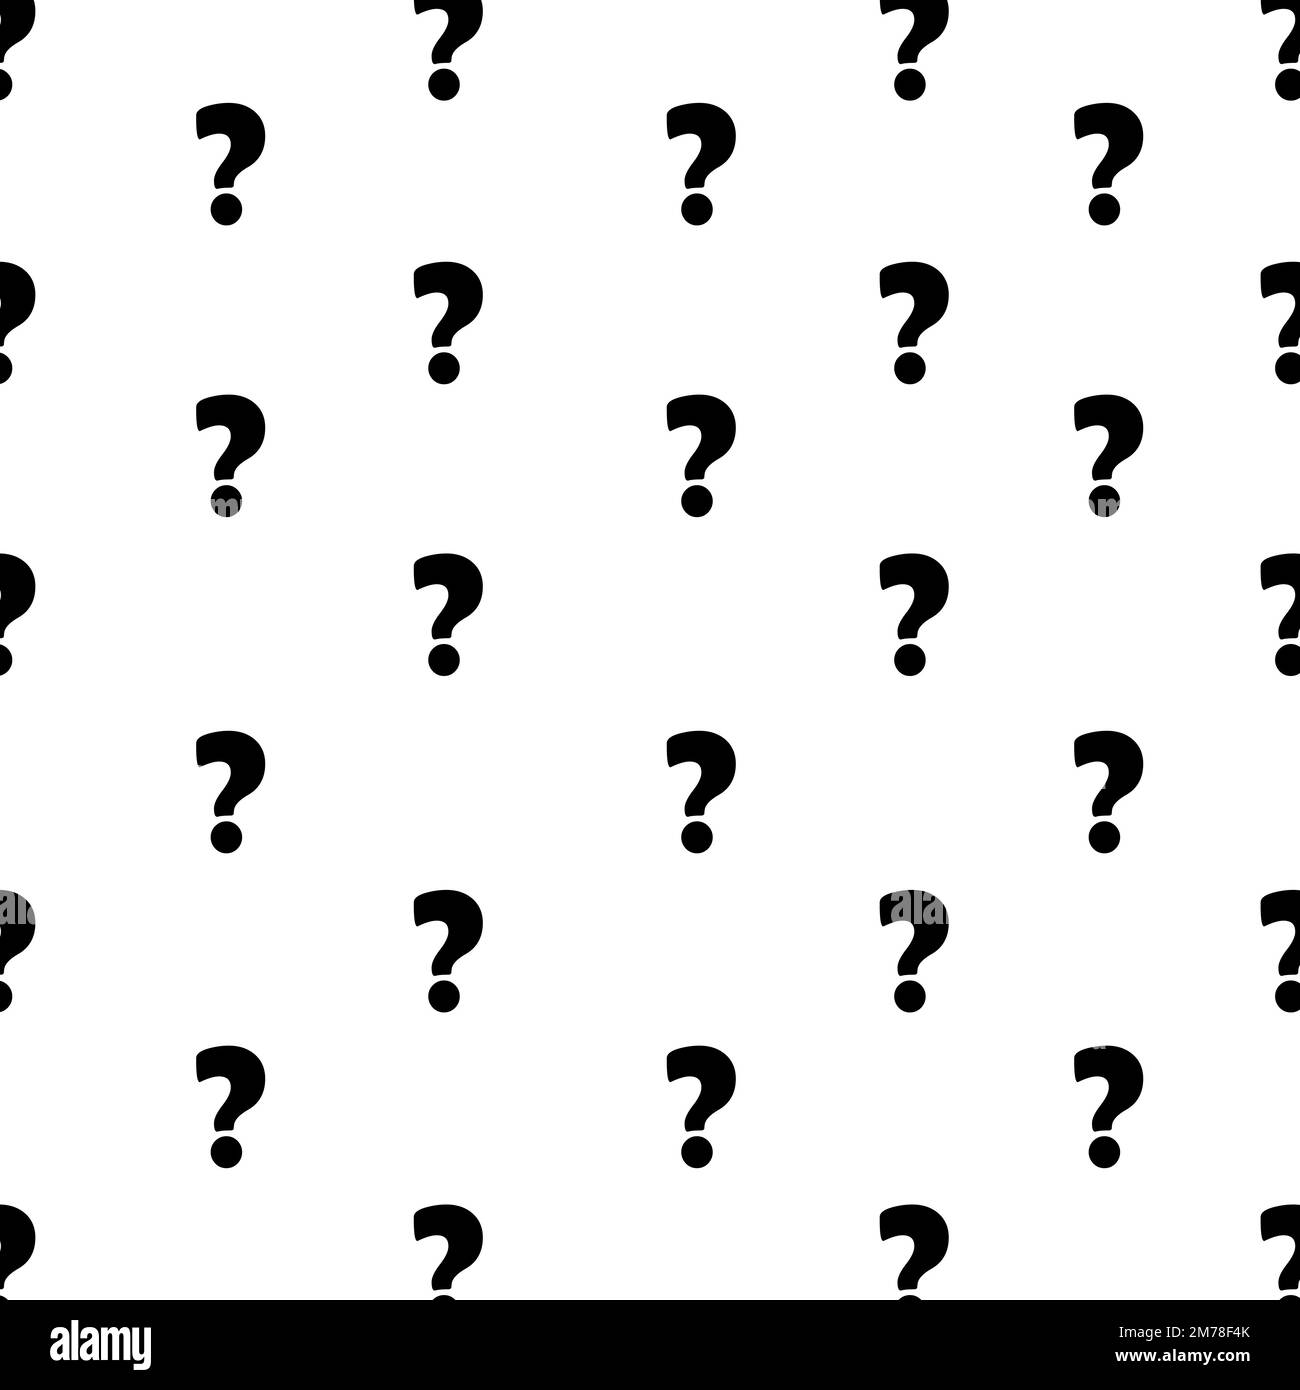 Question Mark seamless pattern, isolated on white background. Vector illustration, easy to edit. pattern Stock Vector